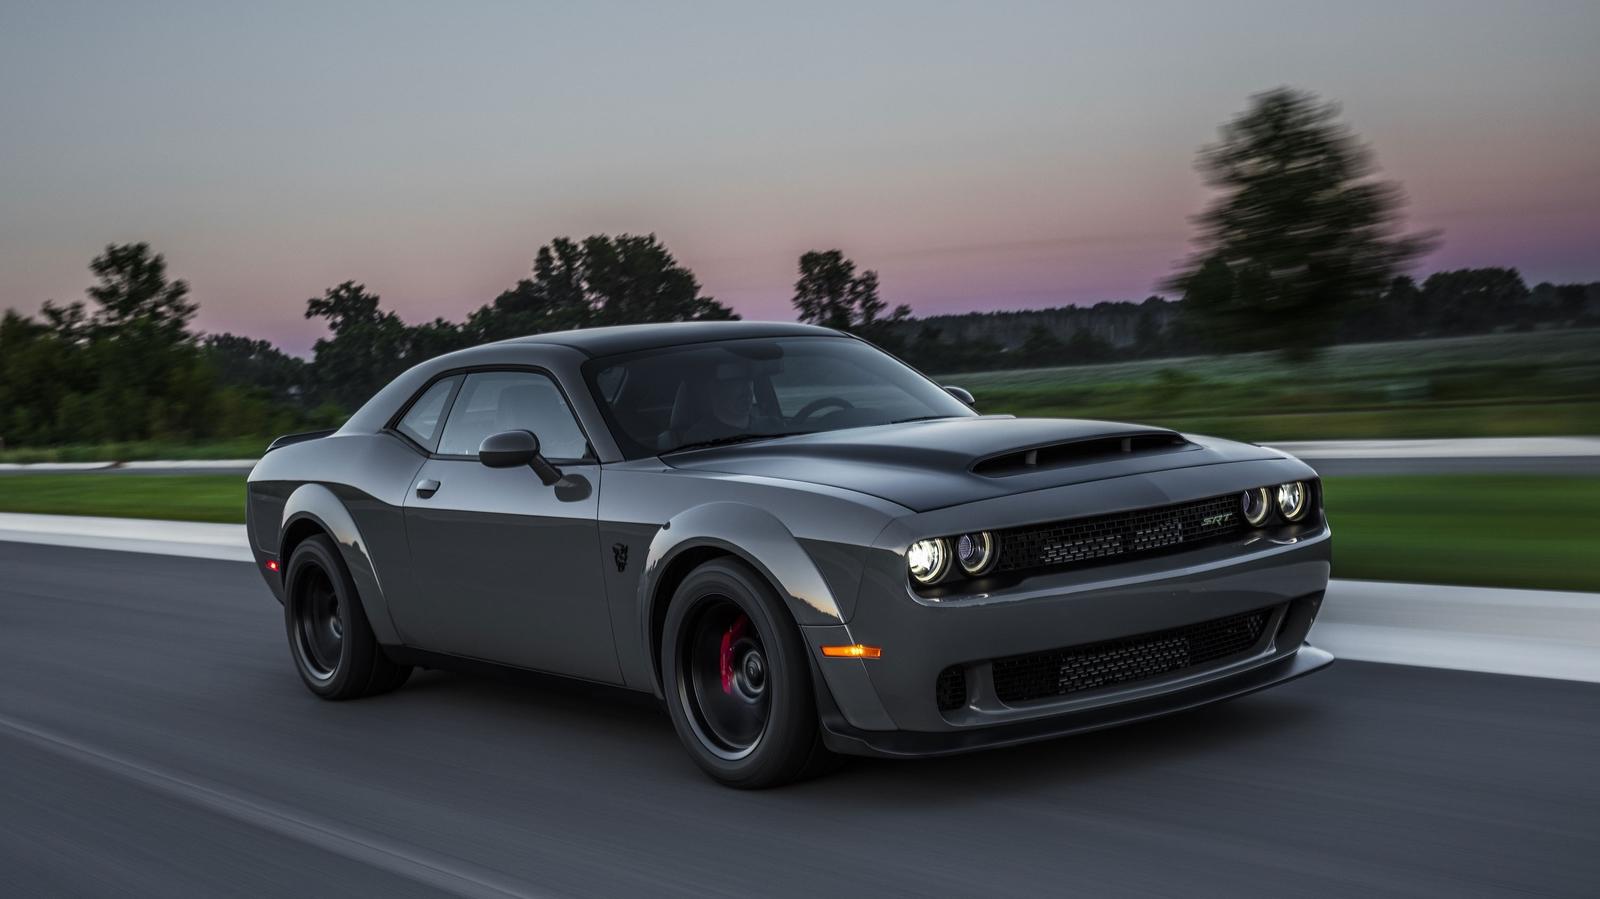 Dodge Demon: Latest News, Reviews, Specifications, Prices, Photo